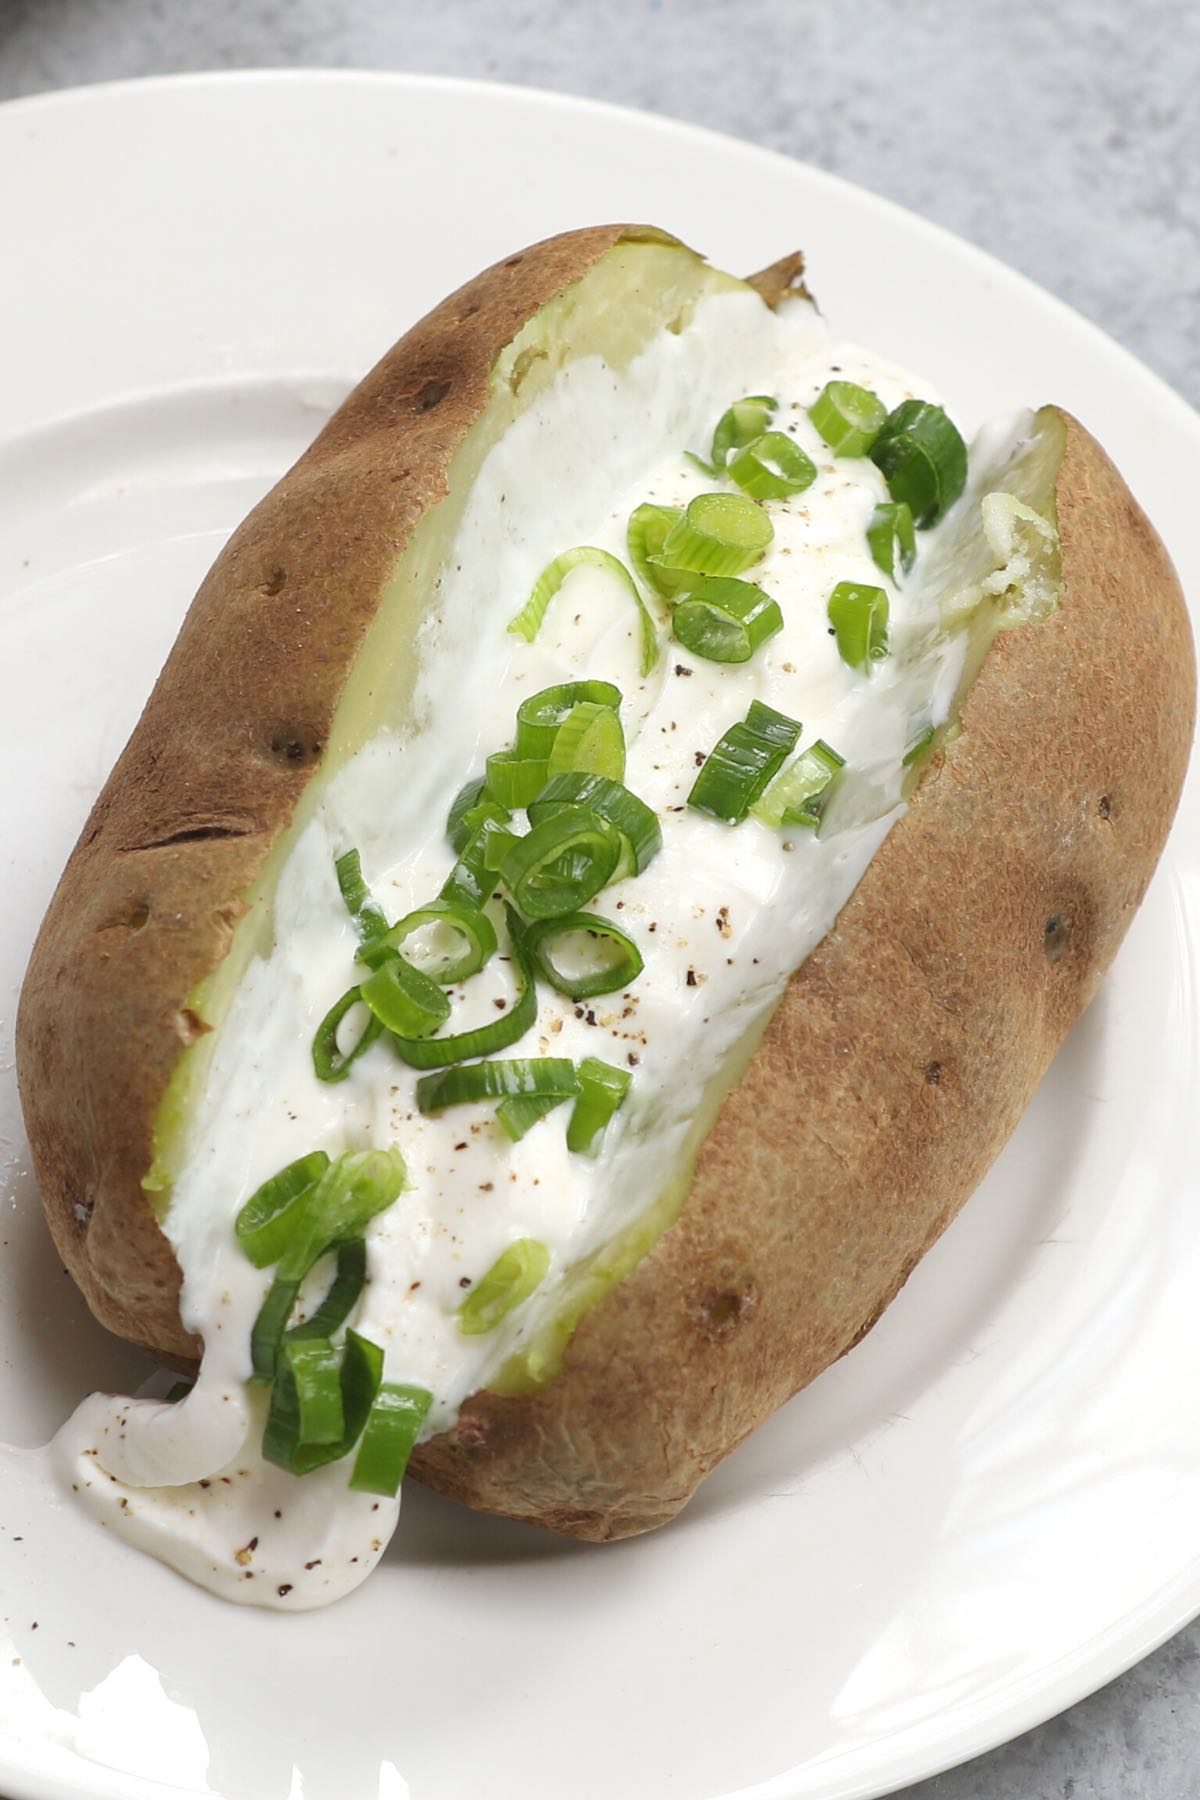 A soft and tender microwave baked potato garnished with butter, sour cream and green onions